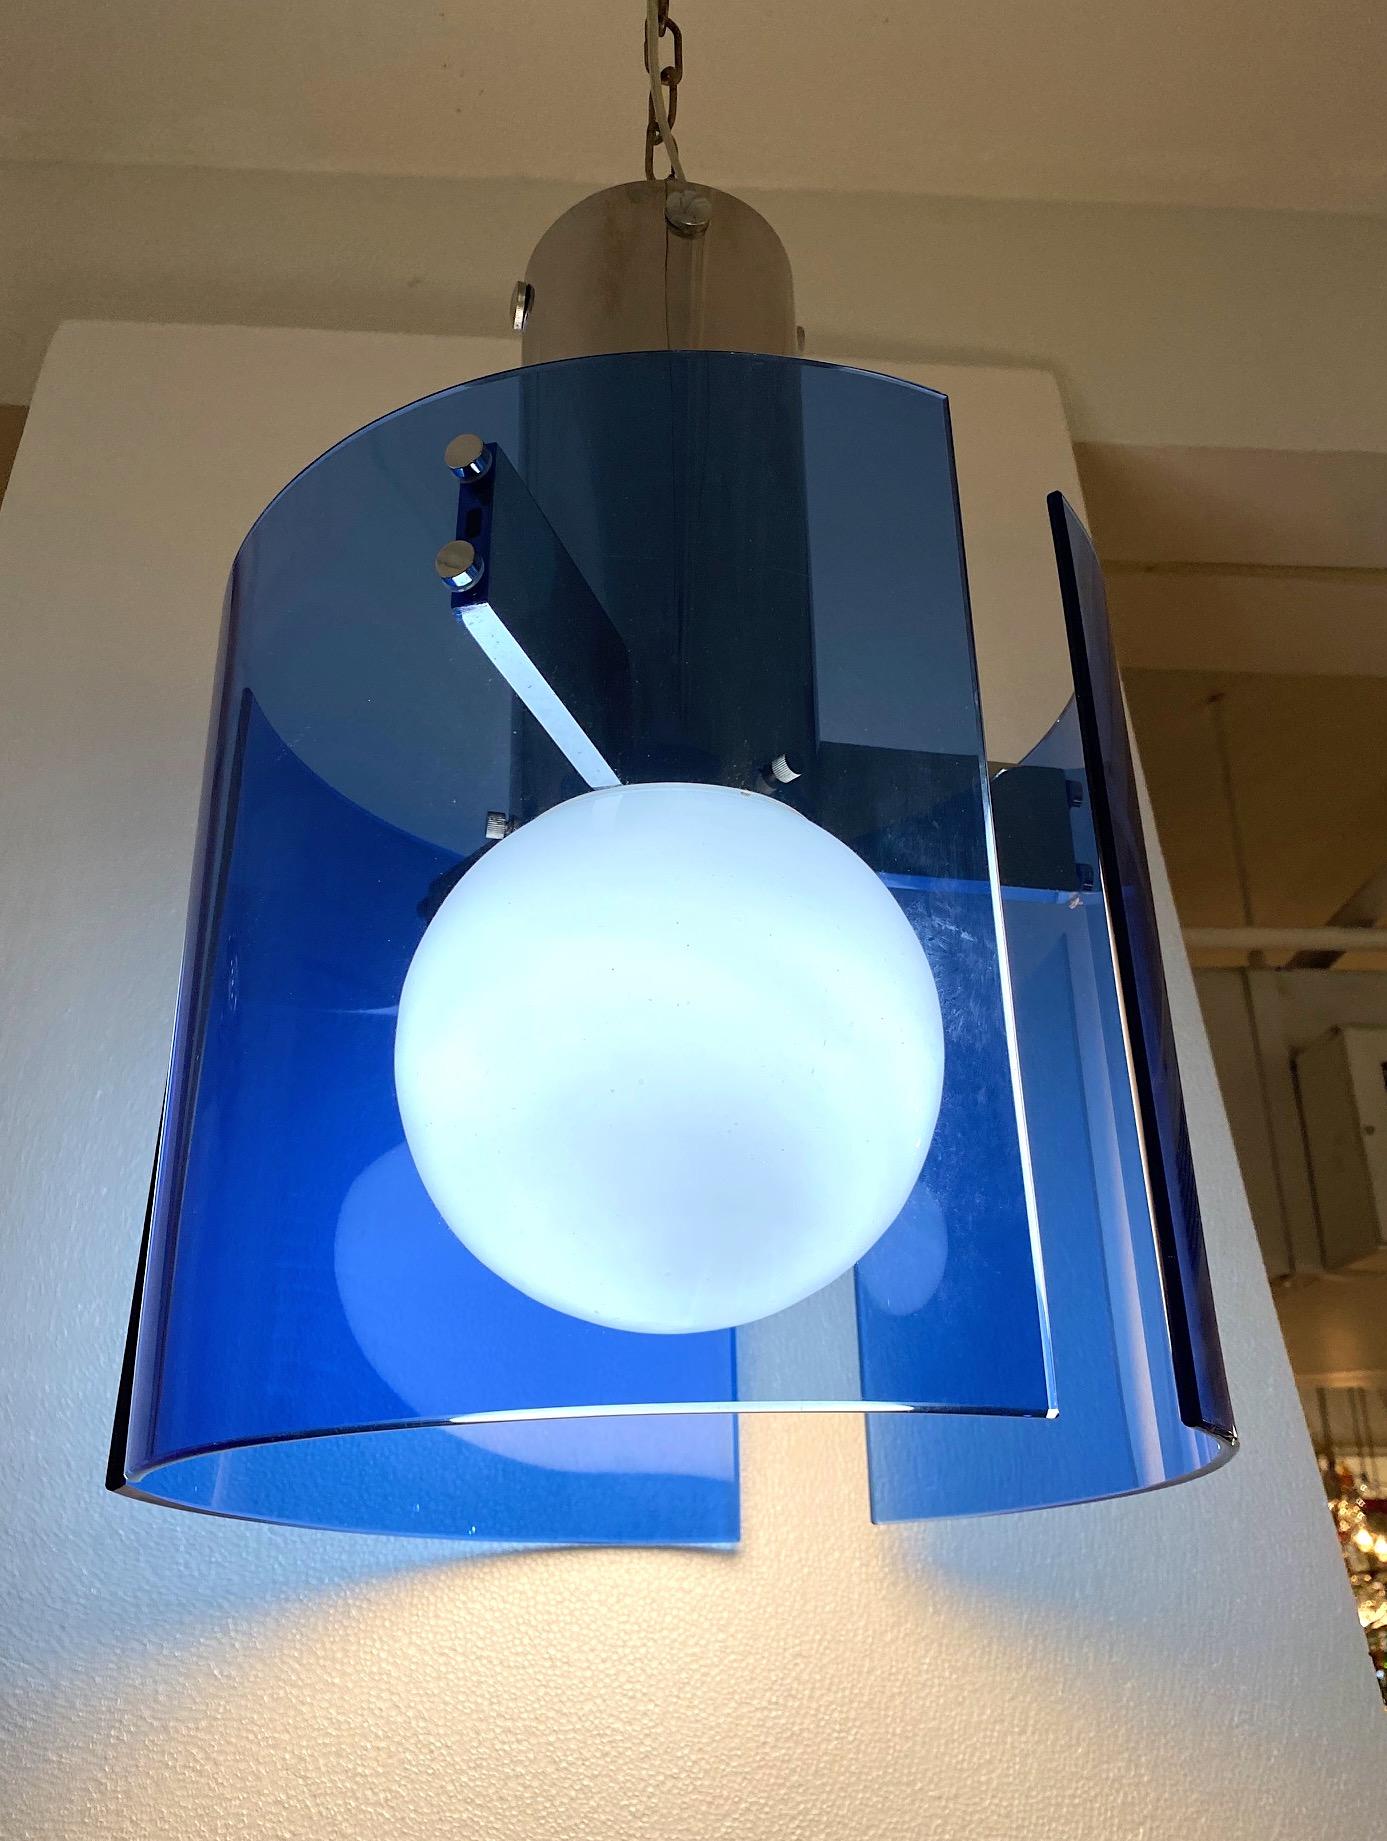 Veca of Italy 1970s Chrome & Blue Glass Panel Pendant or Ceiling Mount Light In Good Condition For Sale In New York, NY